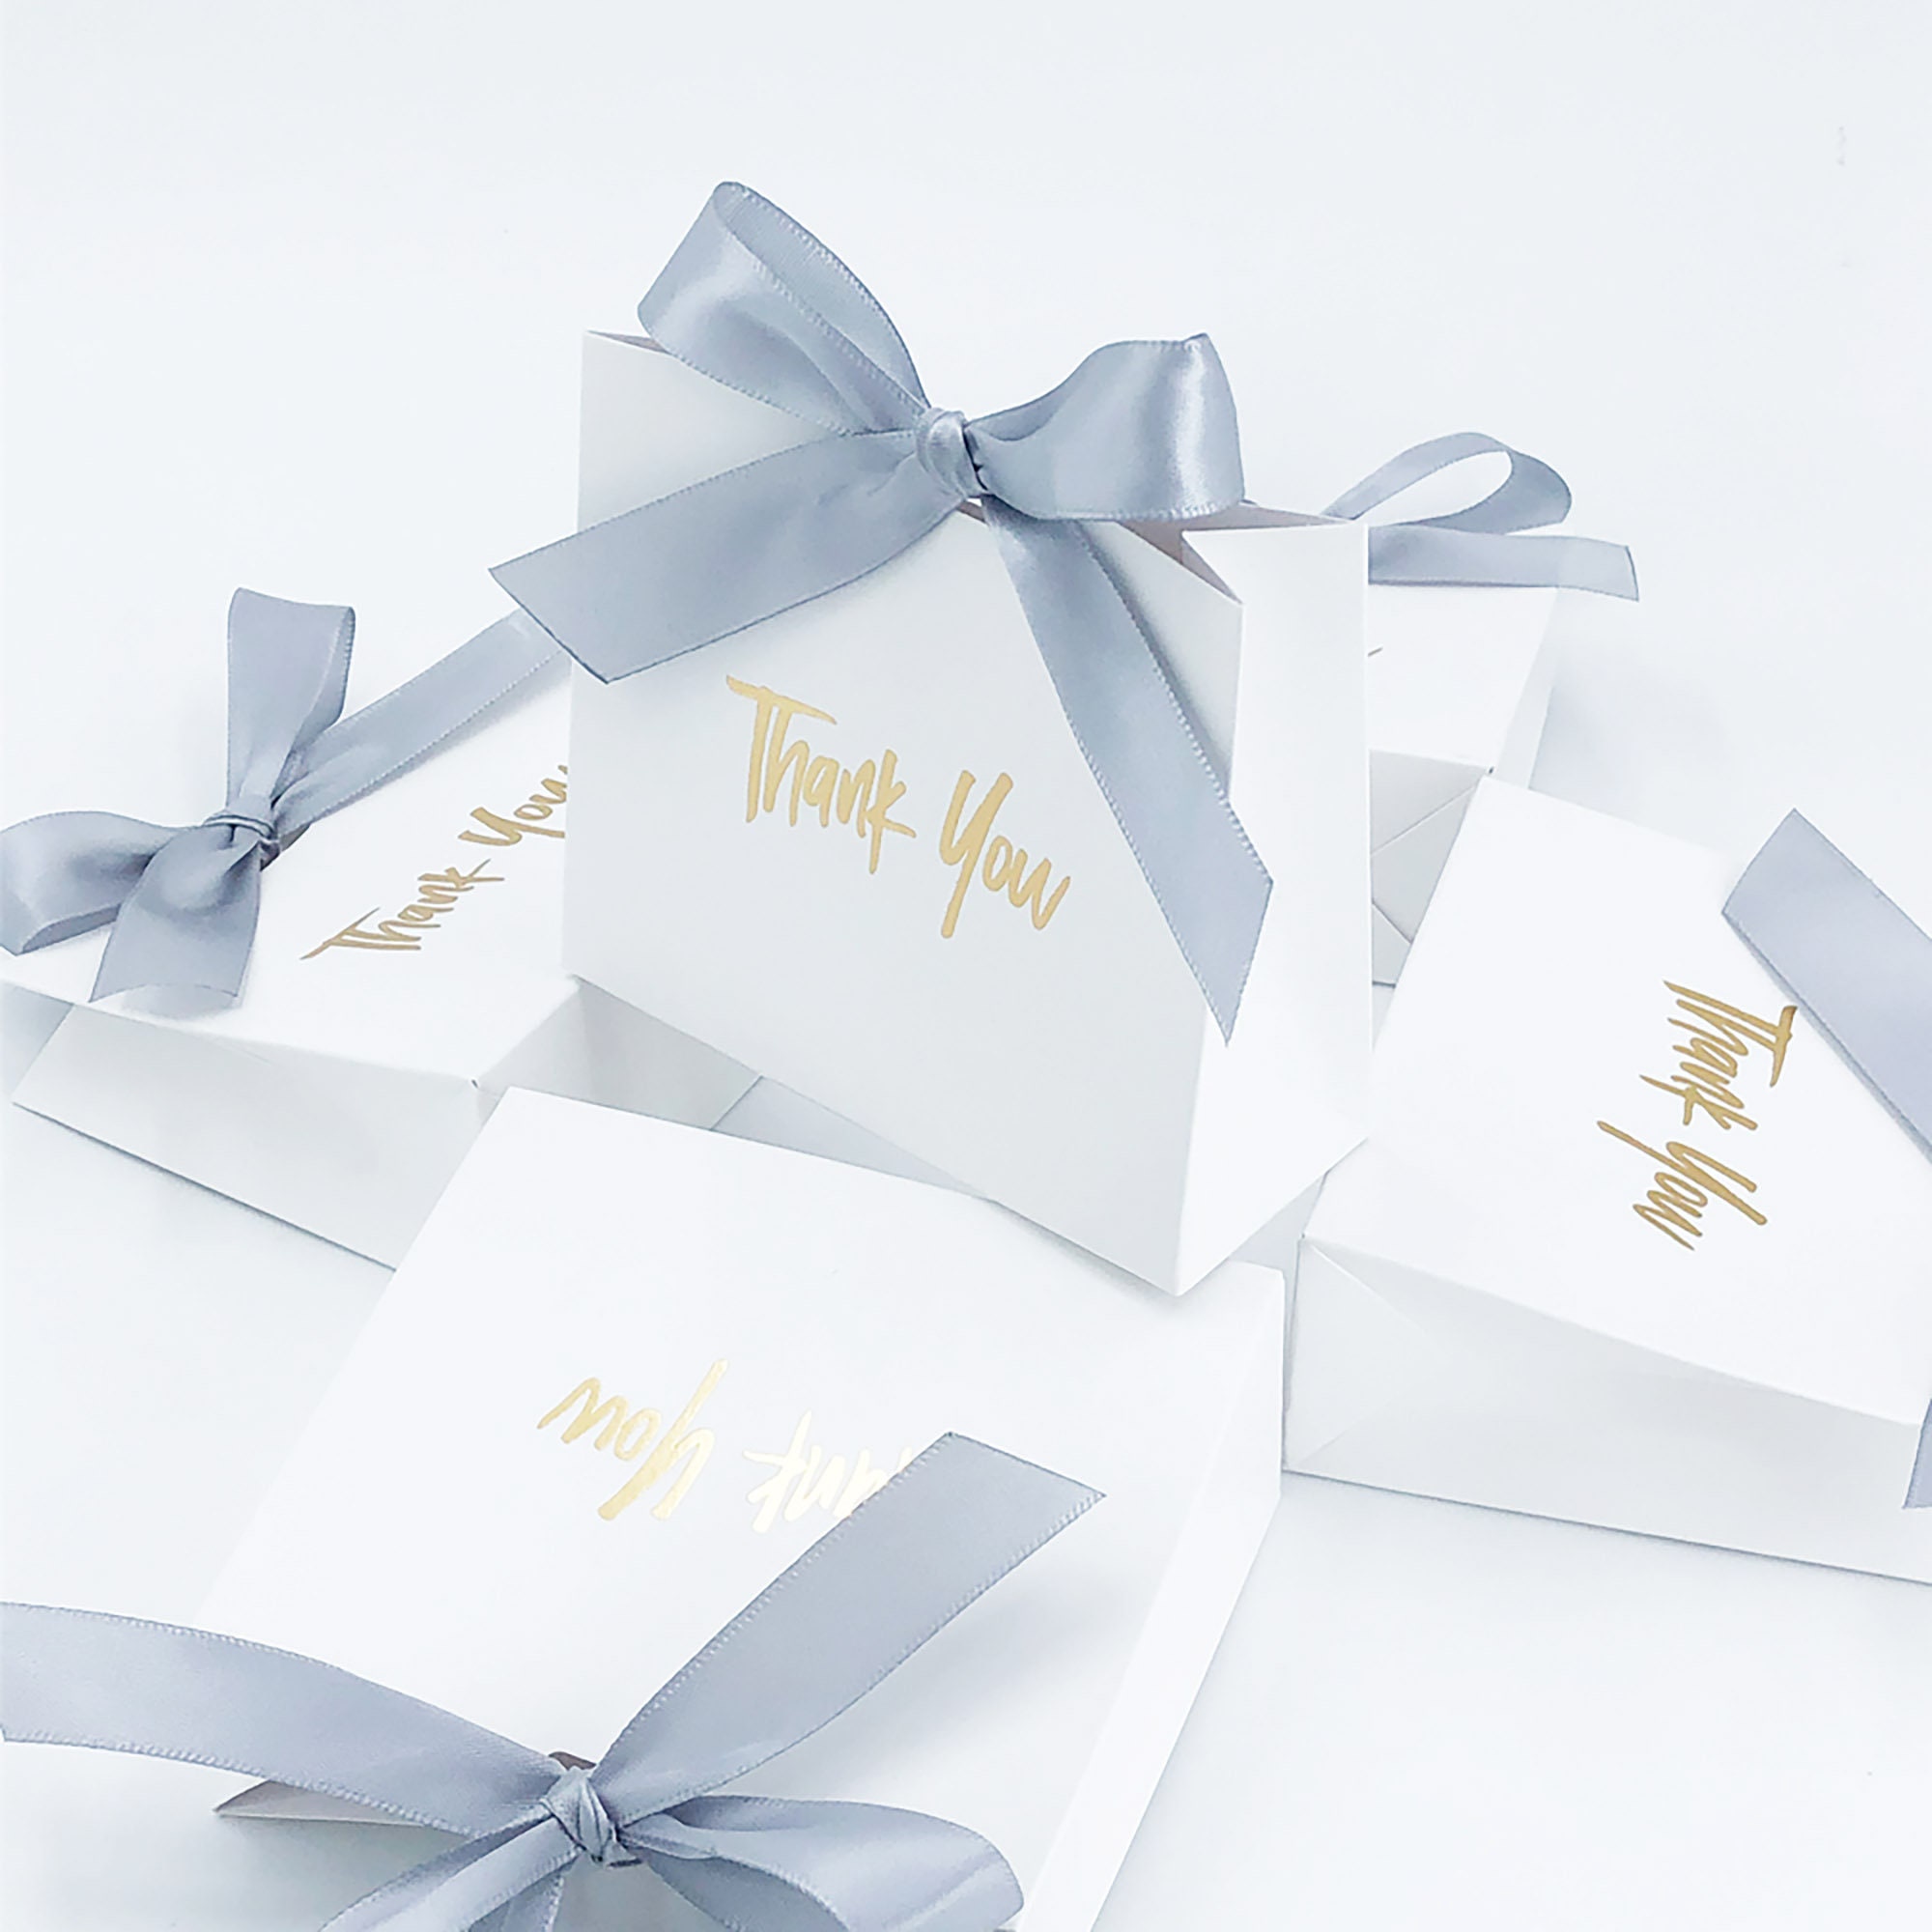 10Packs Small Thank You Gift Bag Party Favor Bags Treat Boxes with Gold Bow  Ribbon, Black Paper Gift Bags Bulk for Wedding Baby Shower Business Party  Supplies